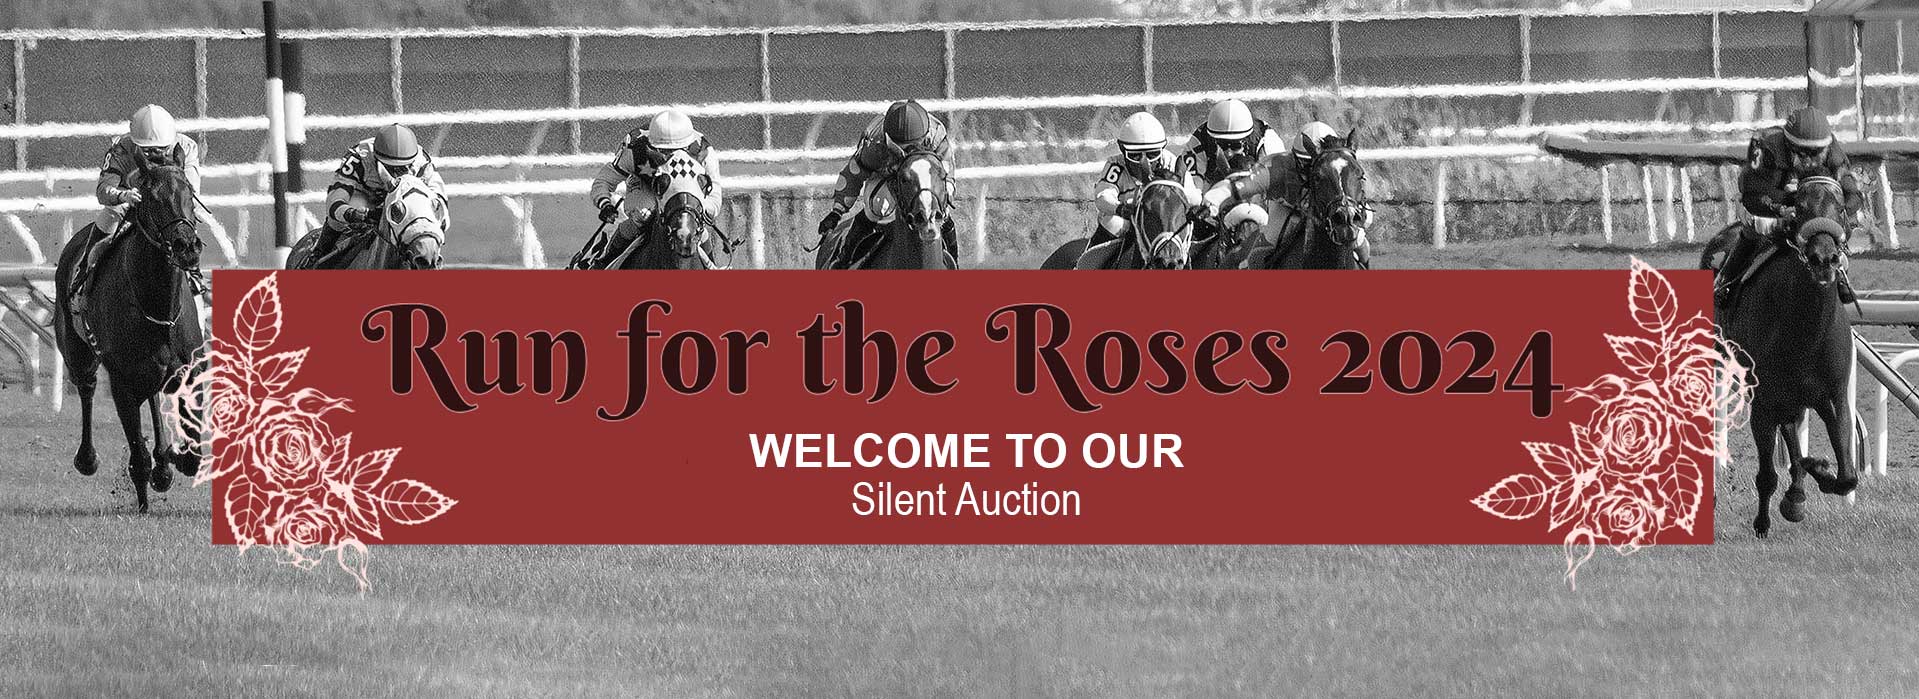 Run-For-the-Roses-Silent-Auction-Banner